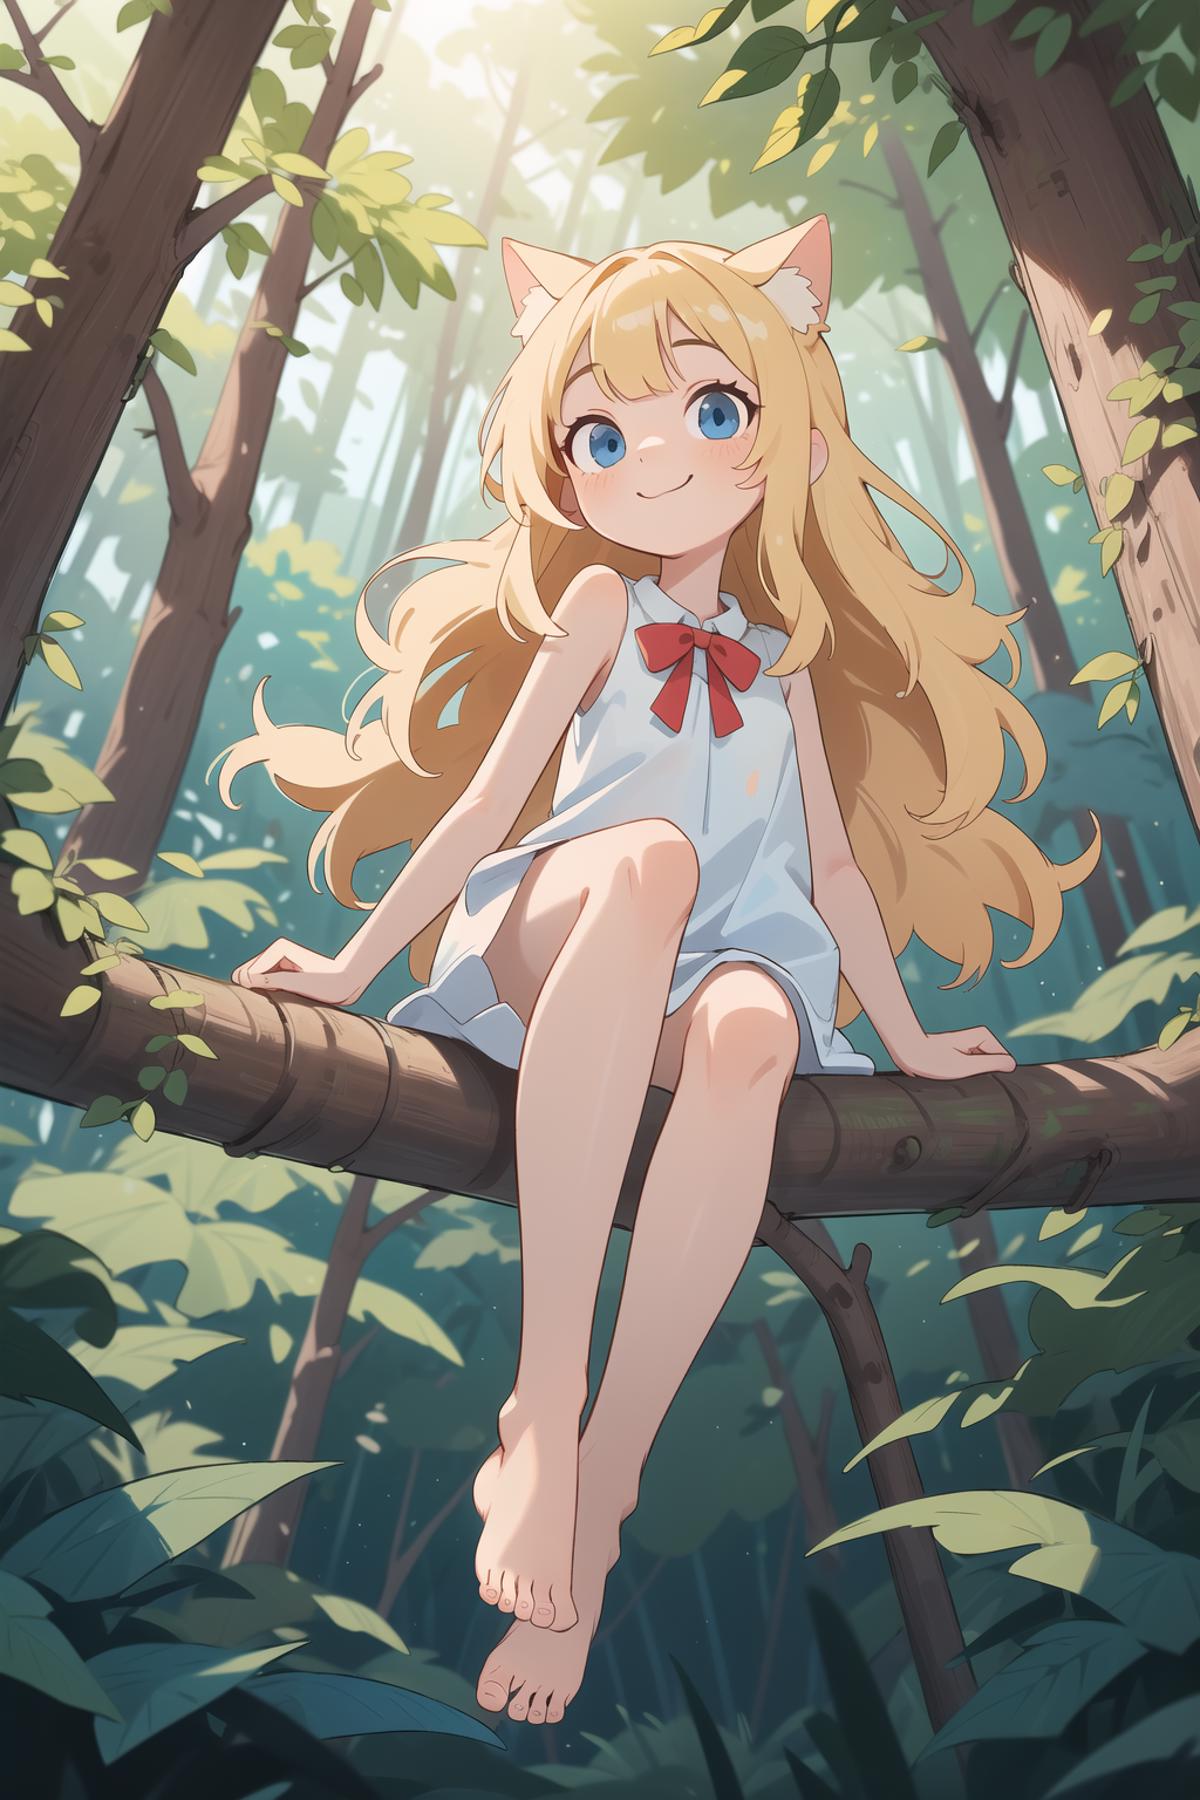 A cartoon girl with a blue dress and a red bow sits in a tree.